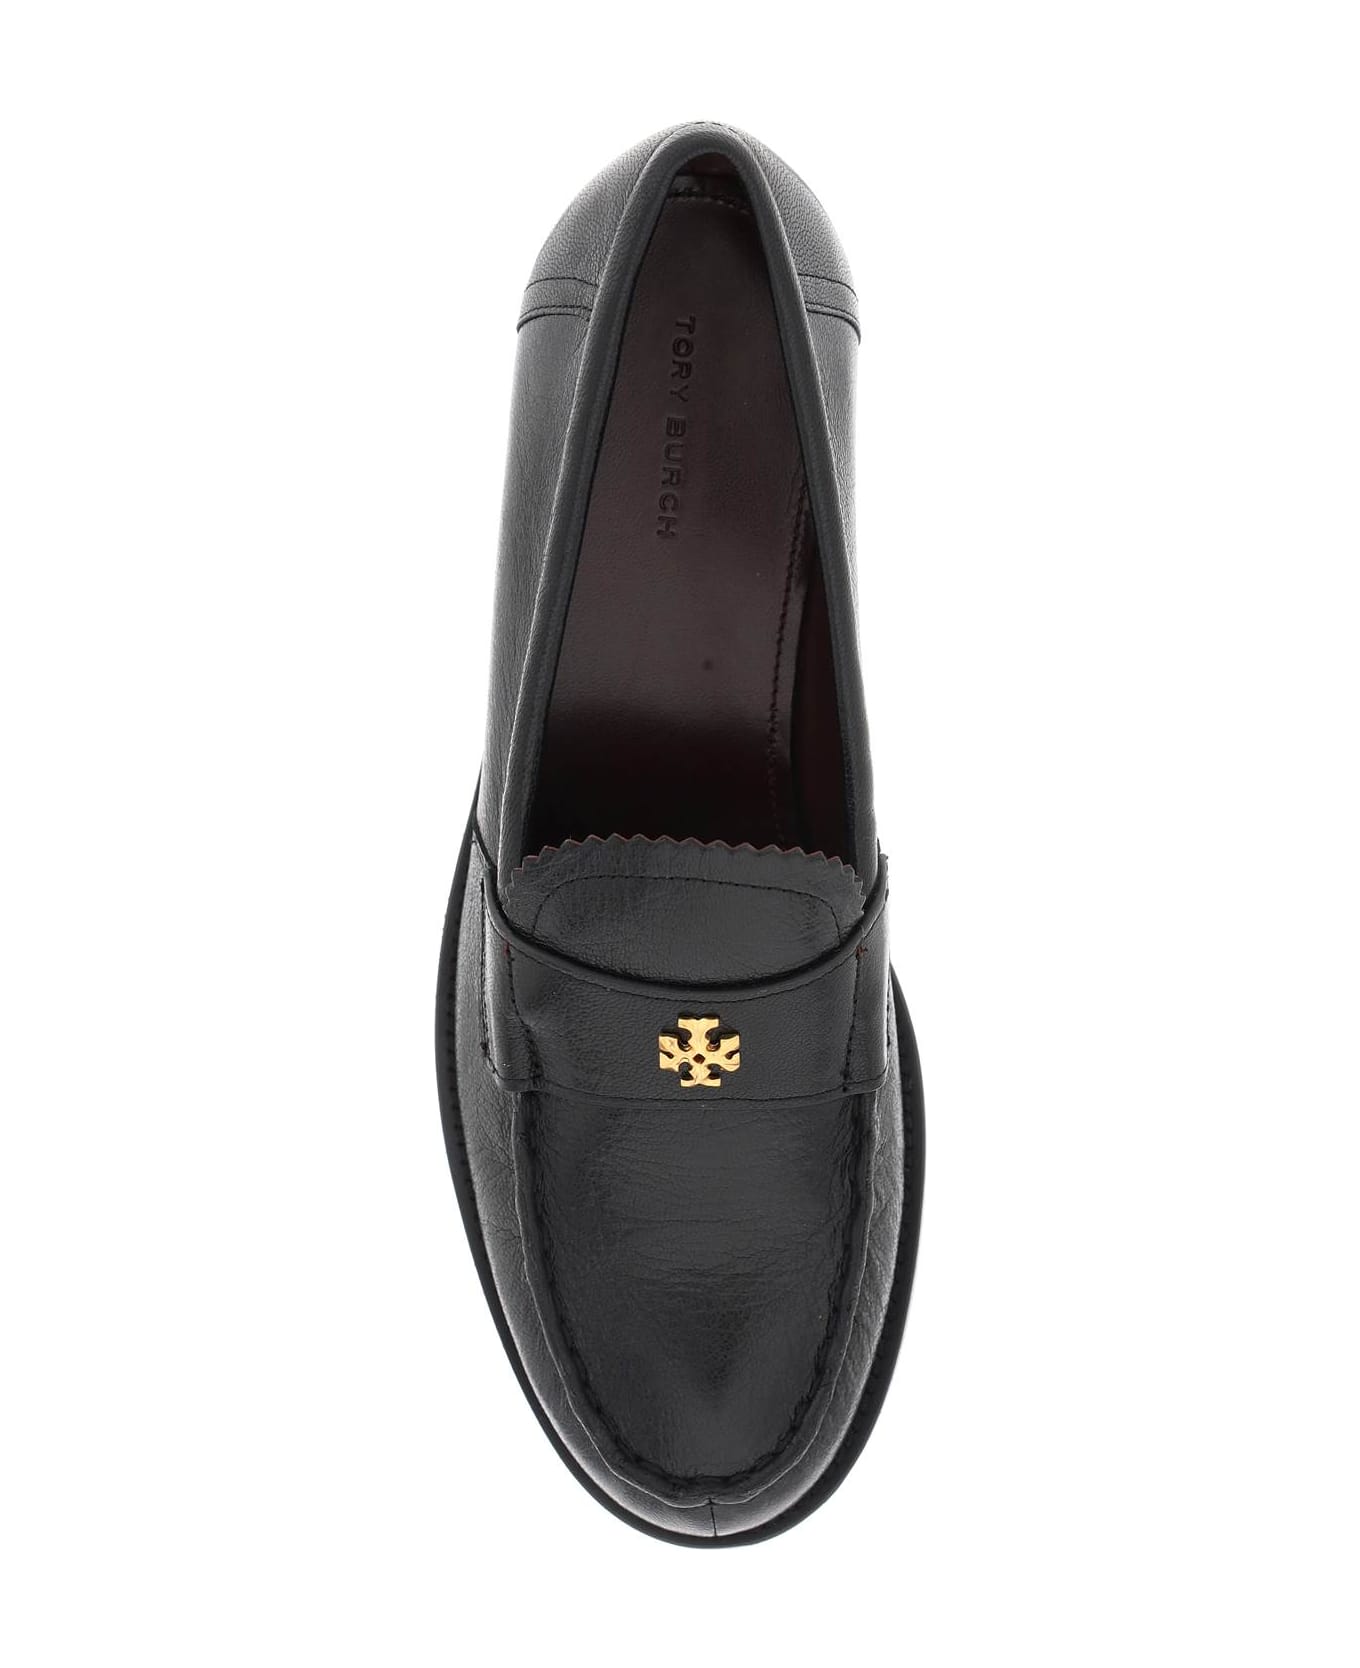 Tory Burch Perry Loafers - Black フラットシューズ